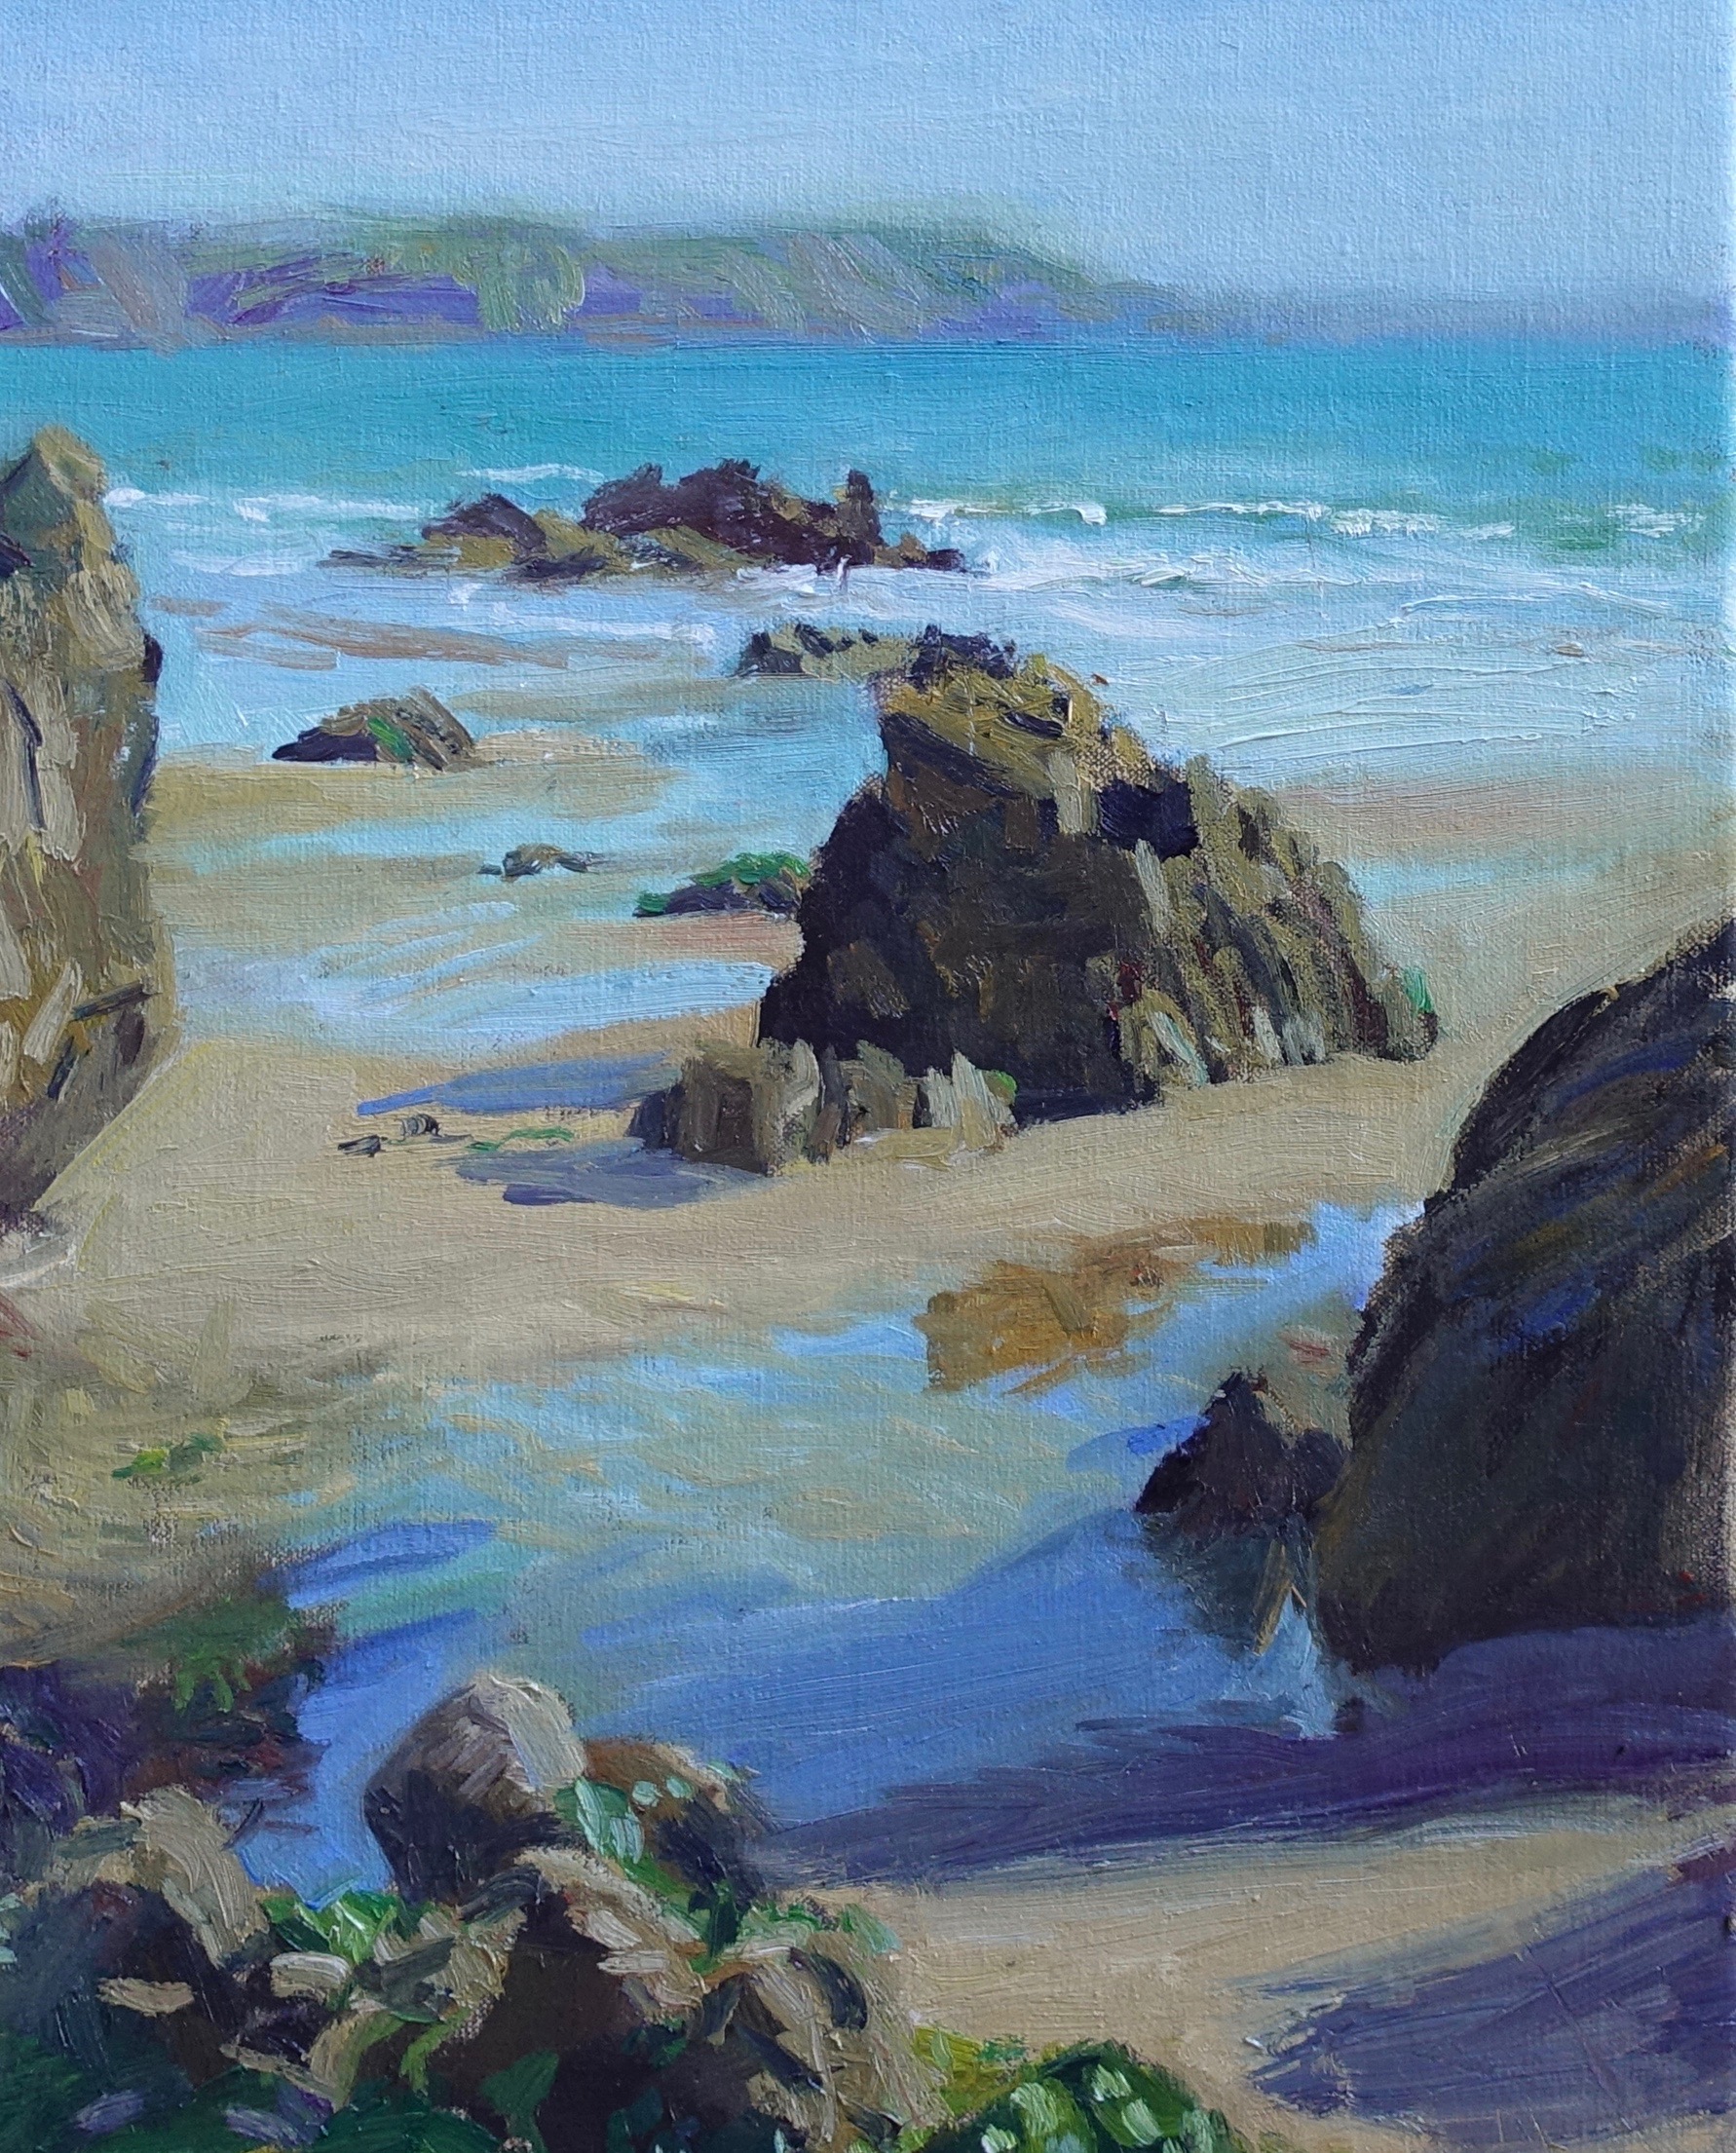 A painting of rocks and water on Marloes Sands, Pembrokeshire